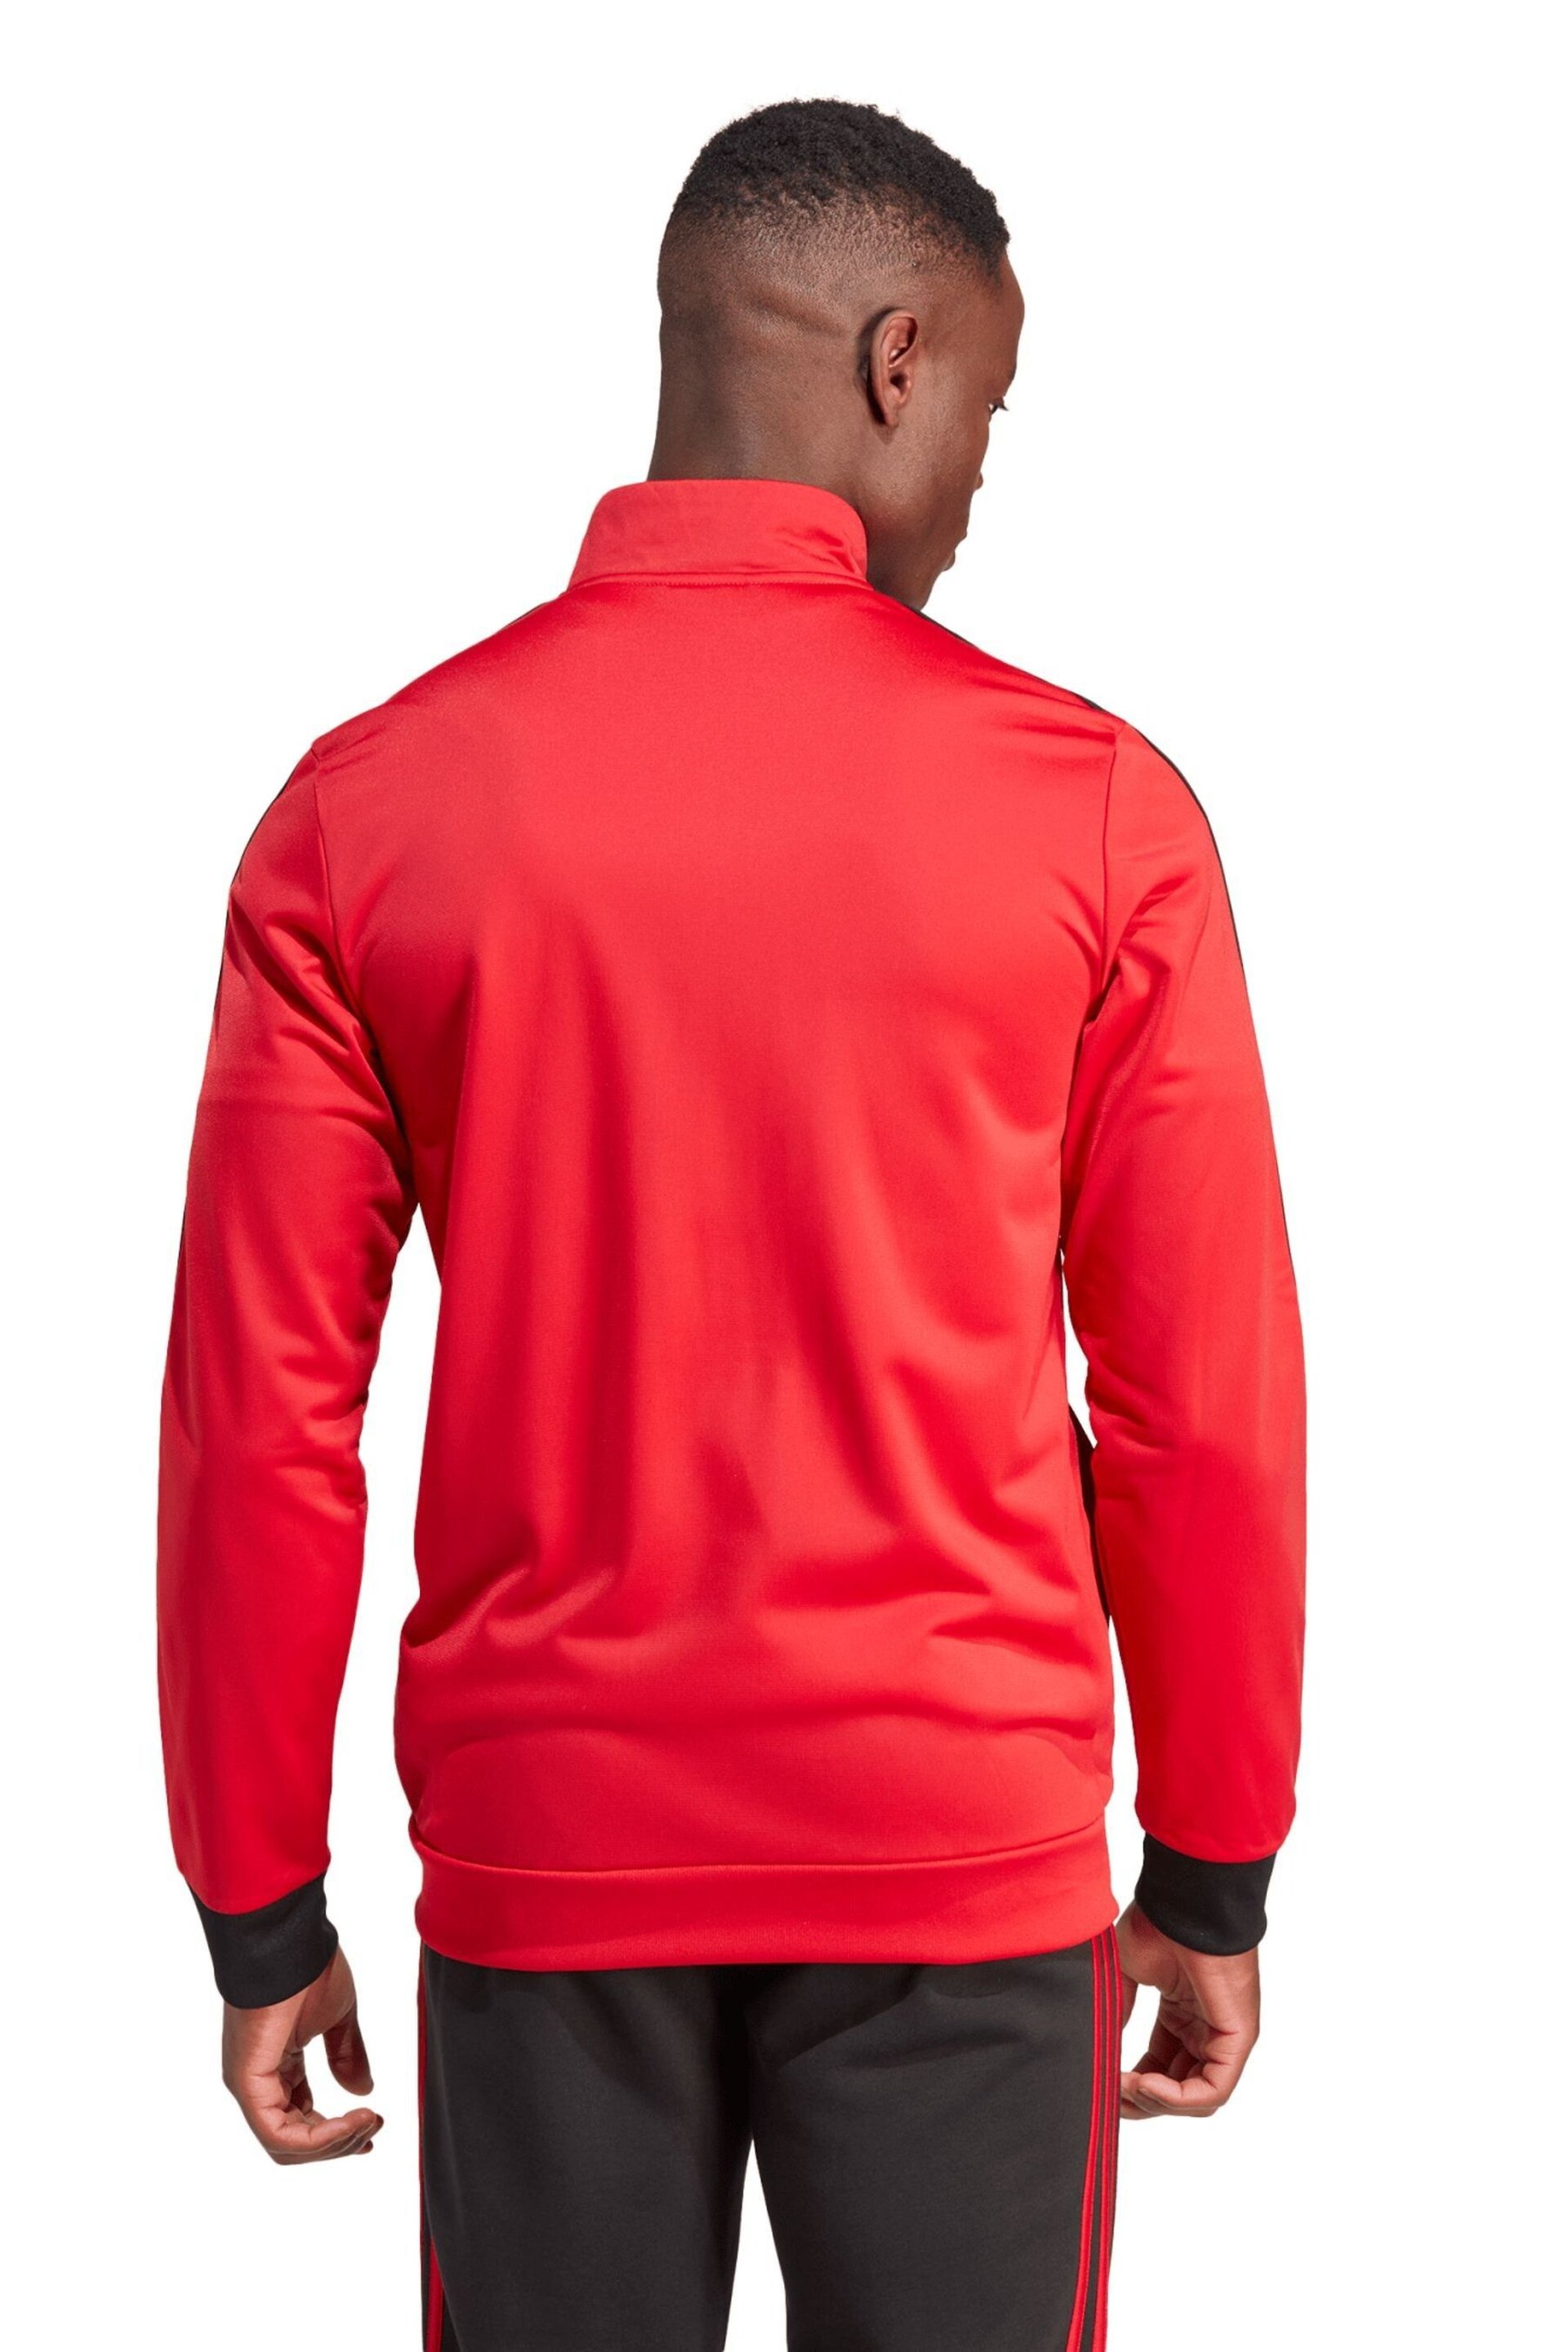 adidas Red Manchester United DNA Track Top - Image 2 of 3